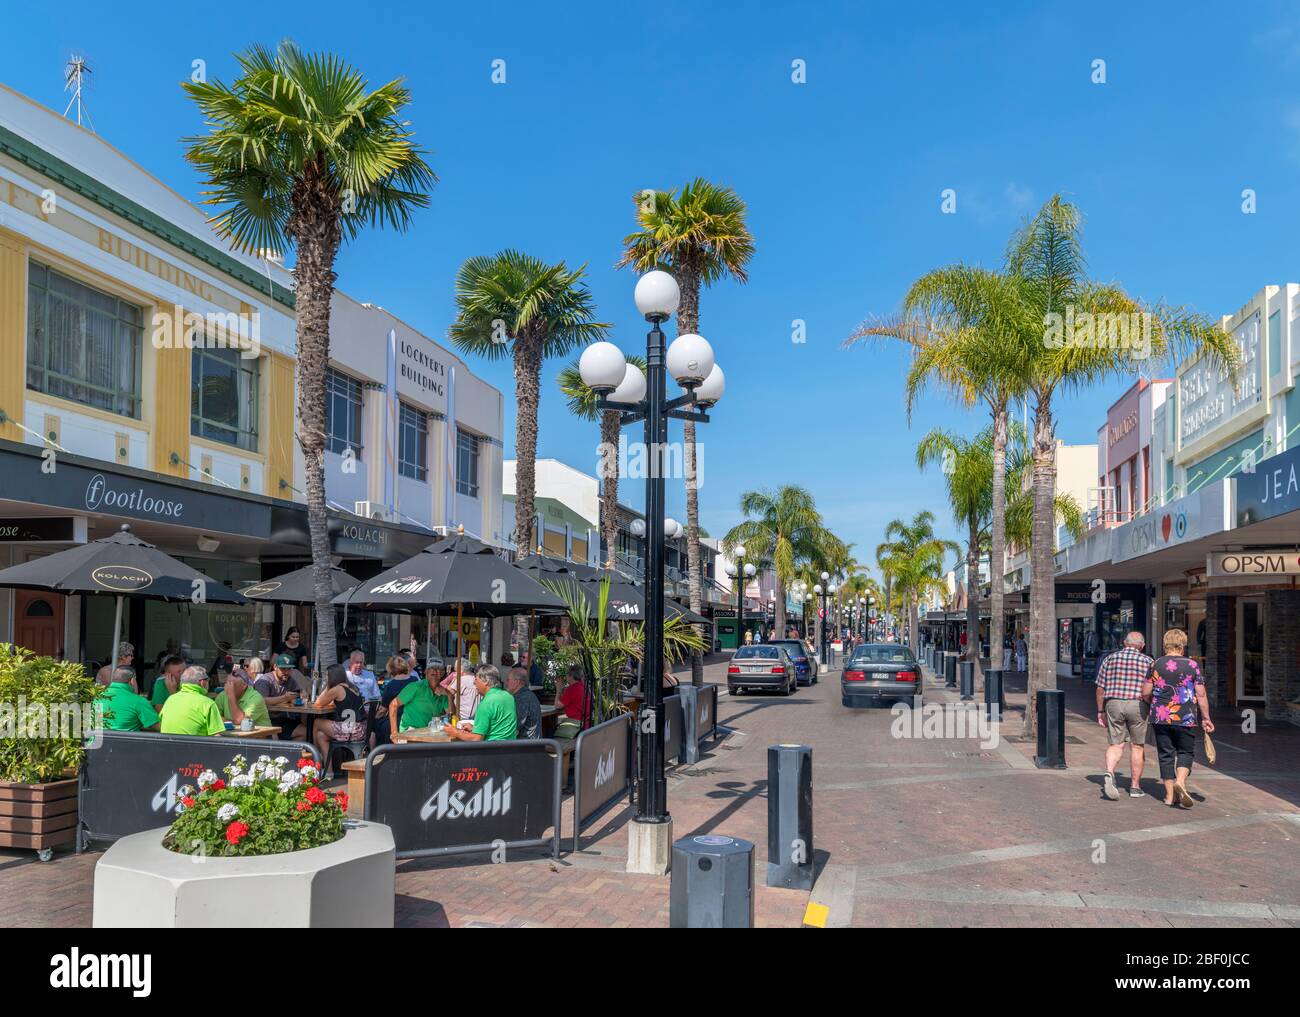 Cafe and shops on Emerson Street in the art deco district of downtown Napier, New Zealand Stock Photo